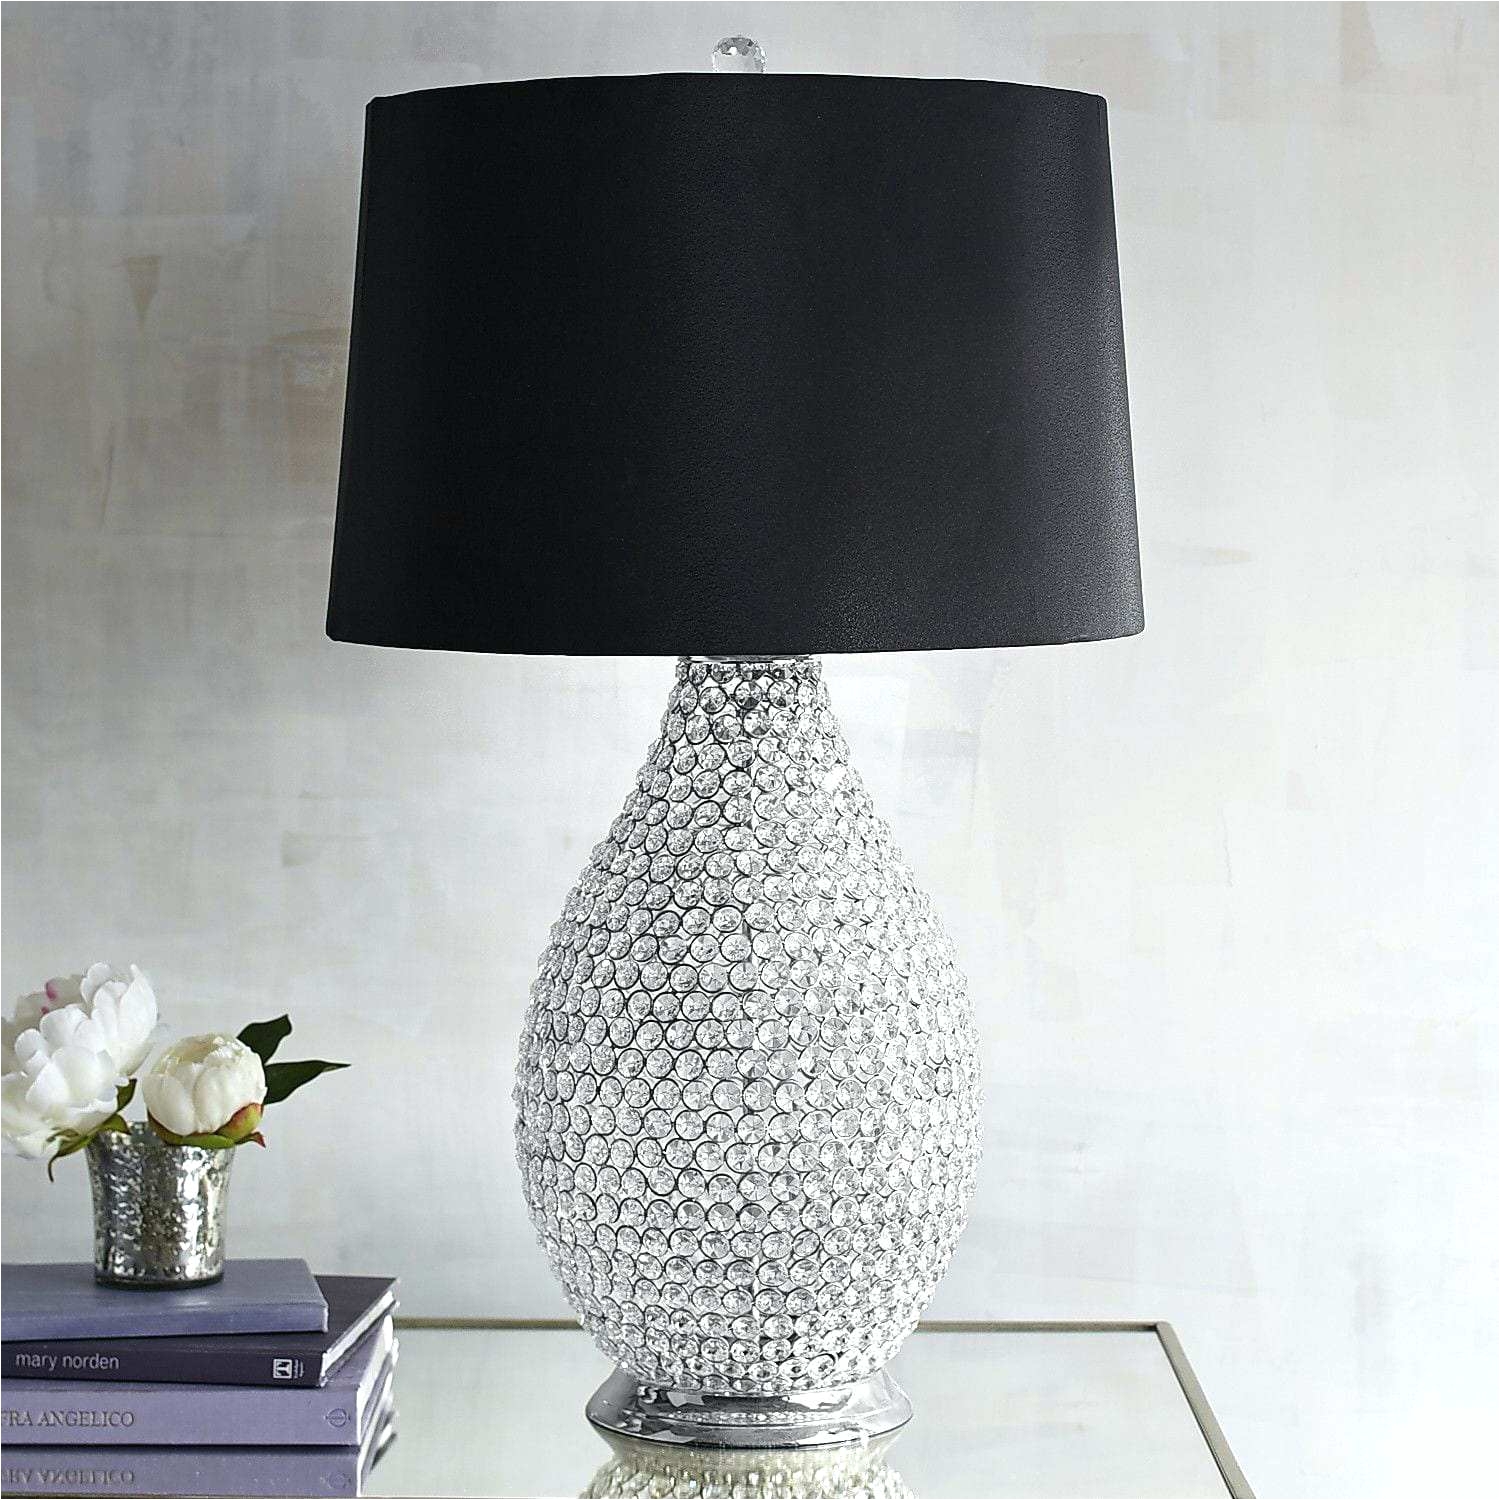 Catchy Tall Bedroom Lamps Lamp Lamp Lamp Unique Contemporary Table Lamp Free Table Lamps 0d